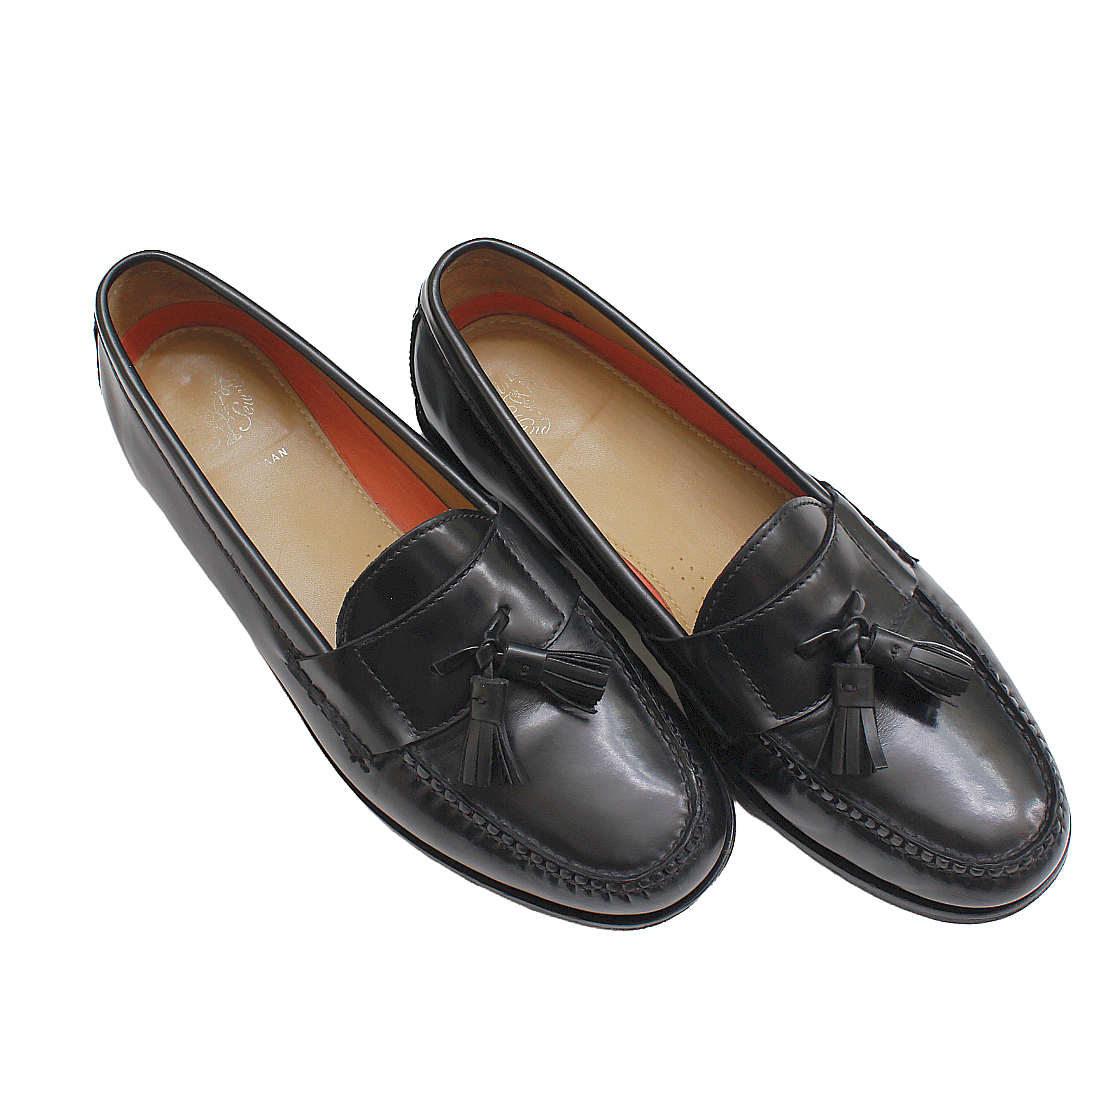 Cole Haan Grand Pinch Tassel Loafers Mens Size 9.5M C12772 Black Leather Pre-Own - $34.65